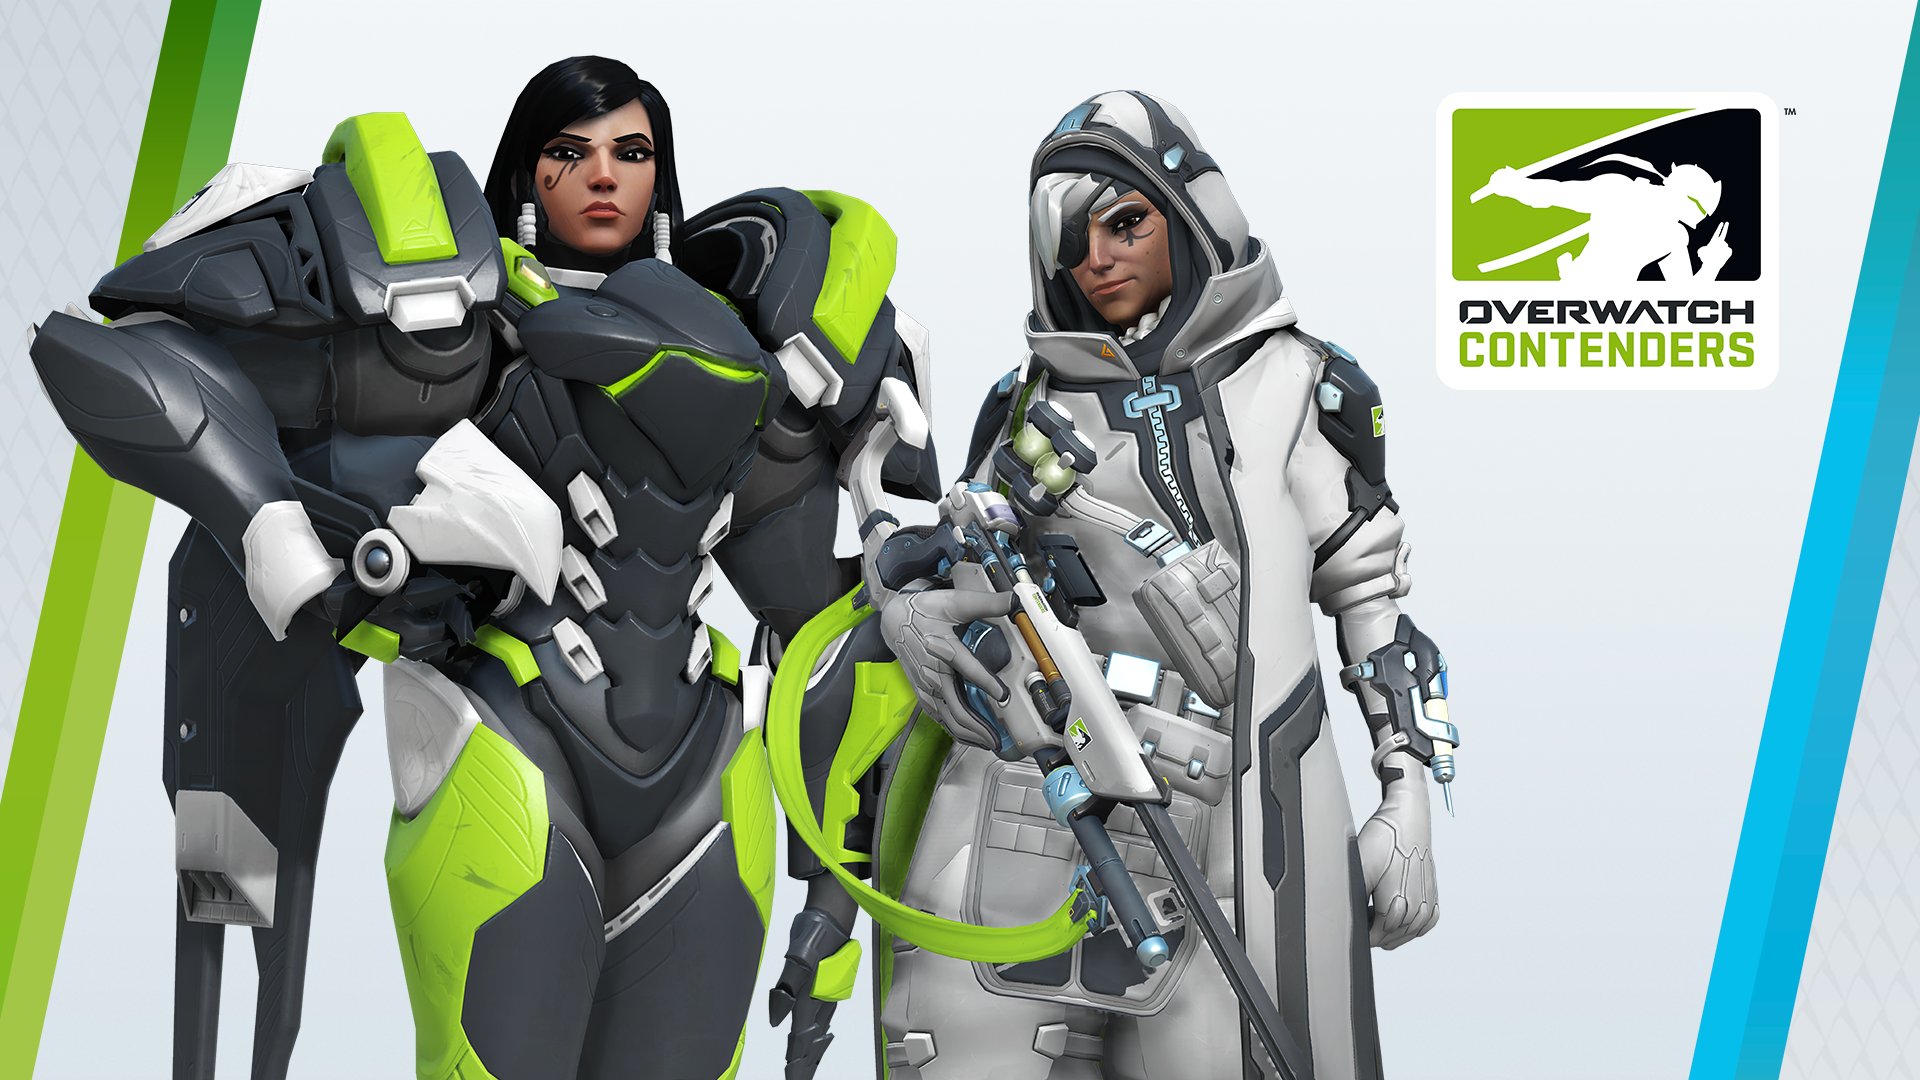 Overwatch Path To Pro This Mother Daughter Duo Always Hits Their Mark Tune In To Contenders Broadcasts During September To Earn The Pharah And Ana Contenders Skins Check Out Our